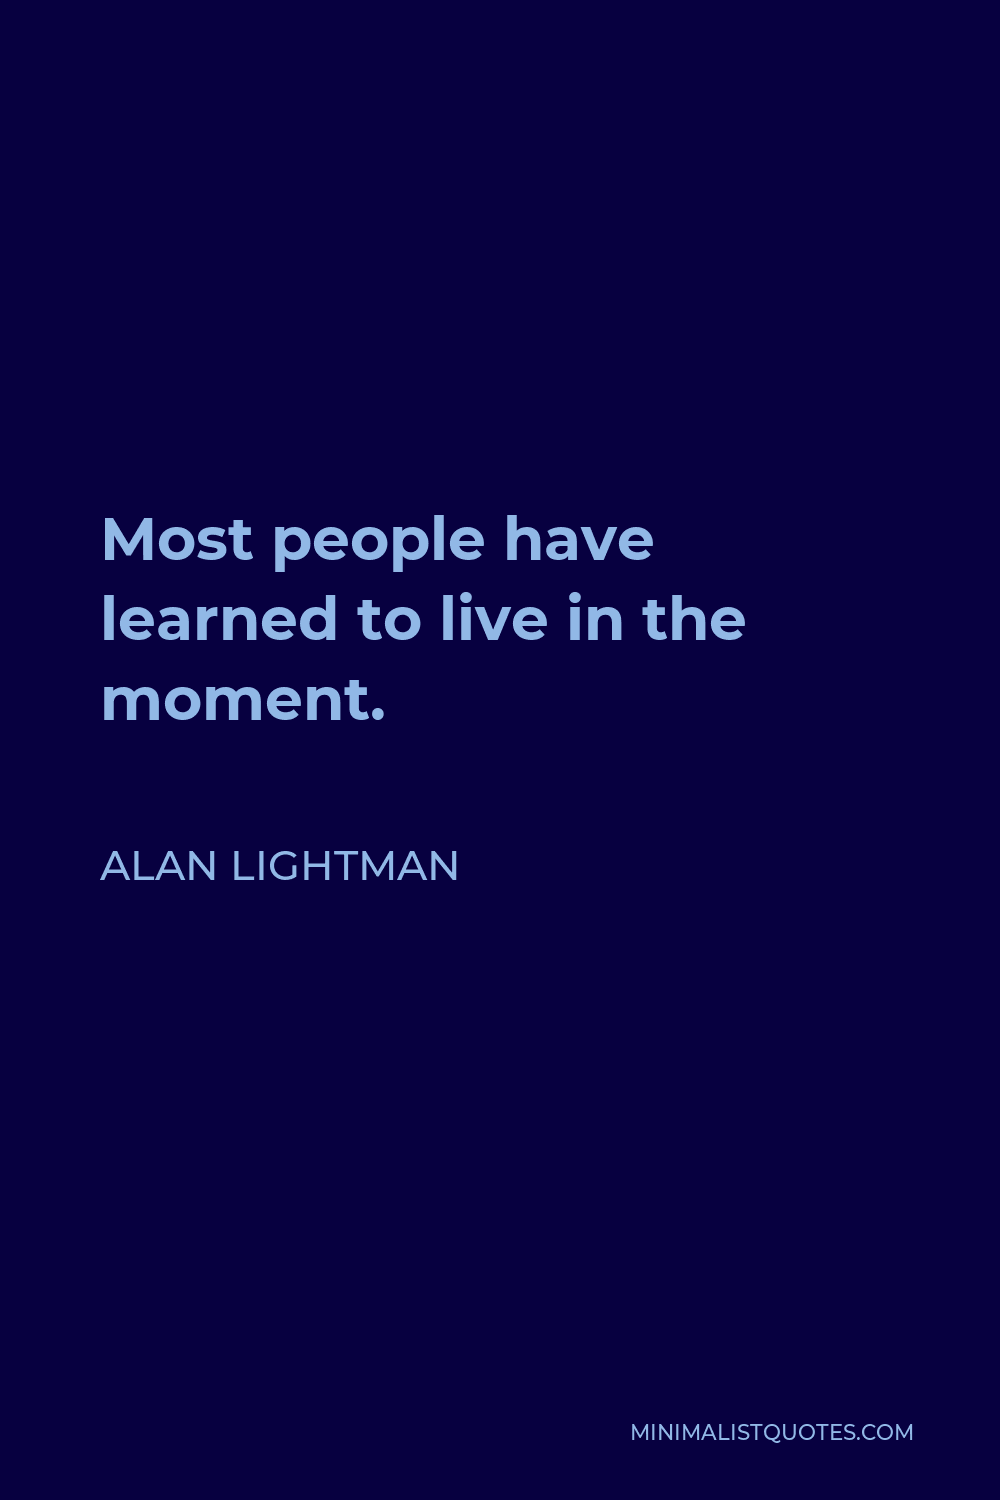 Alan Lightman Quote - Most people have learned to live in the moment.